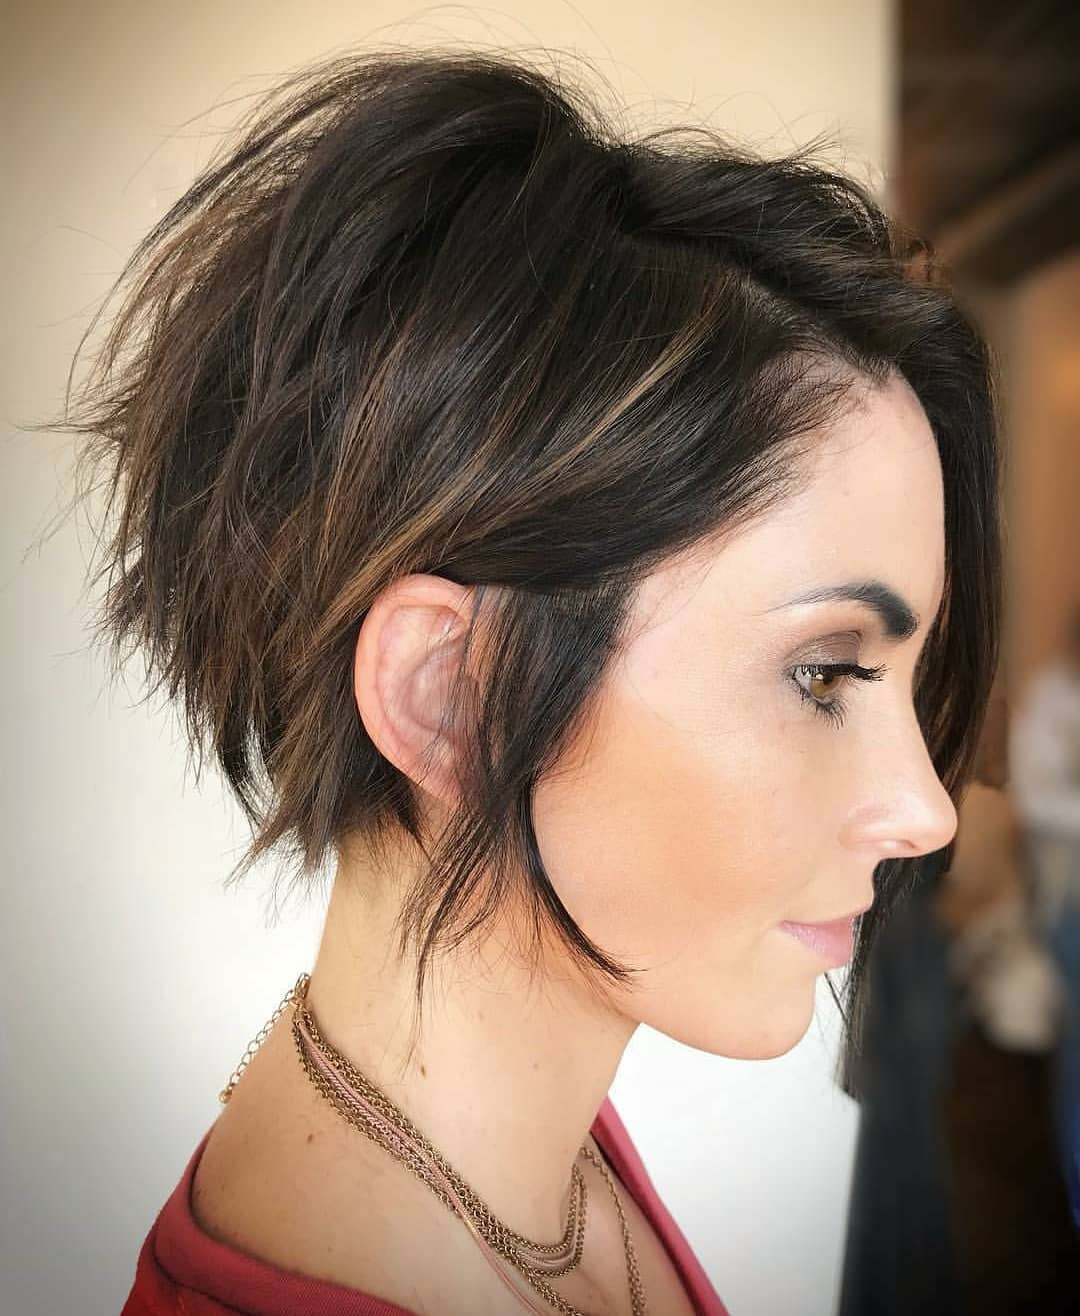 Female Hairstyles 2019
 10 Fab Short Hairstyles with Texture & Color 2019